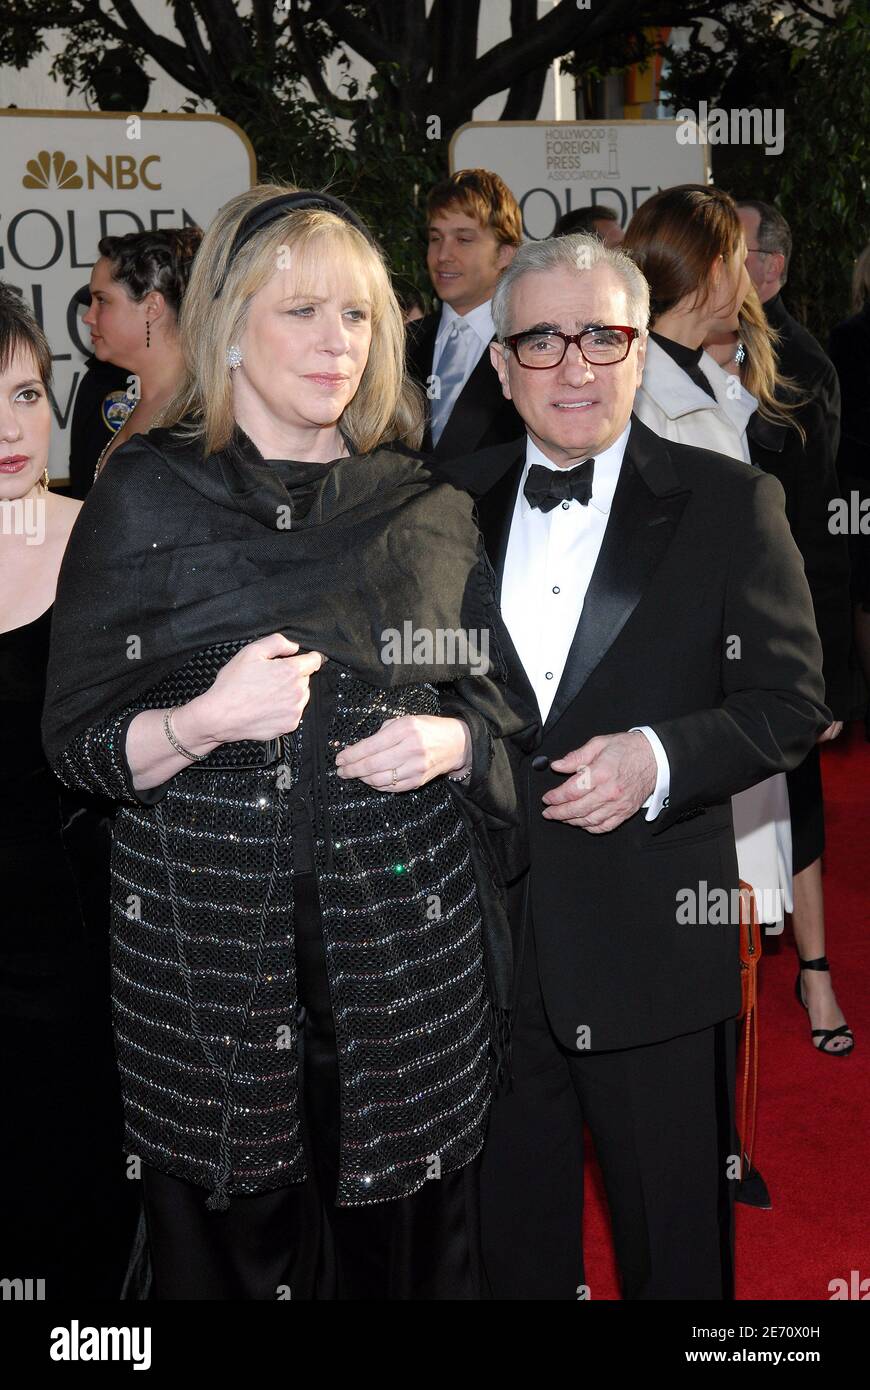 Martin Scorsese poses with his wife on the red carpet of the 64th Annual Golden Globe Awards held at the Beverly Hilton hotel in Los Angeles, CA, USA on January 15. 2007. Photo by Lionel Hahn/MCT/ABACAPRESS.COM Stock Photo